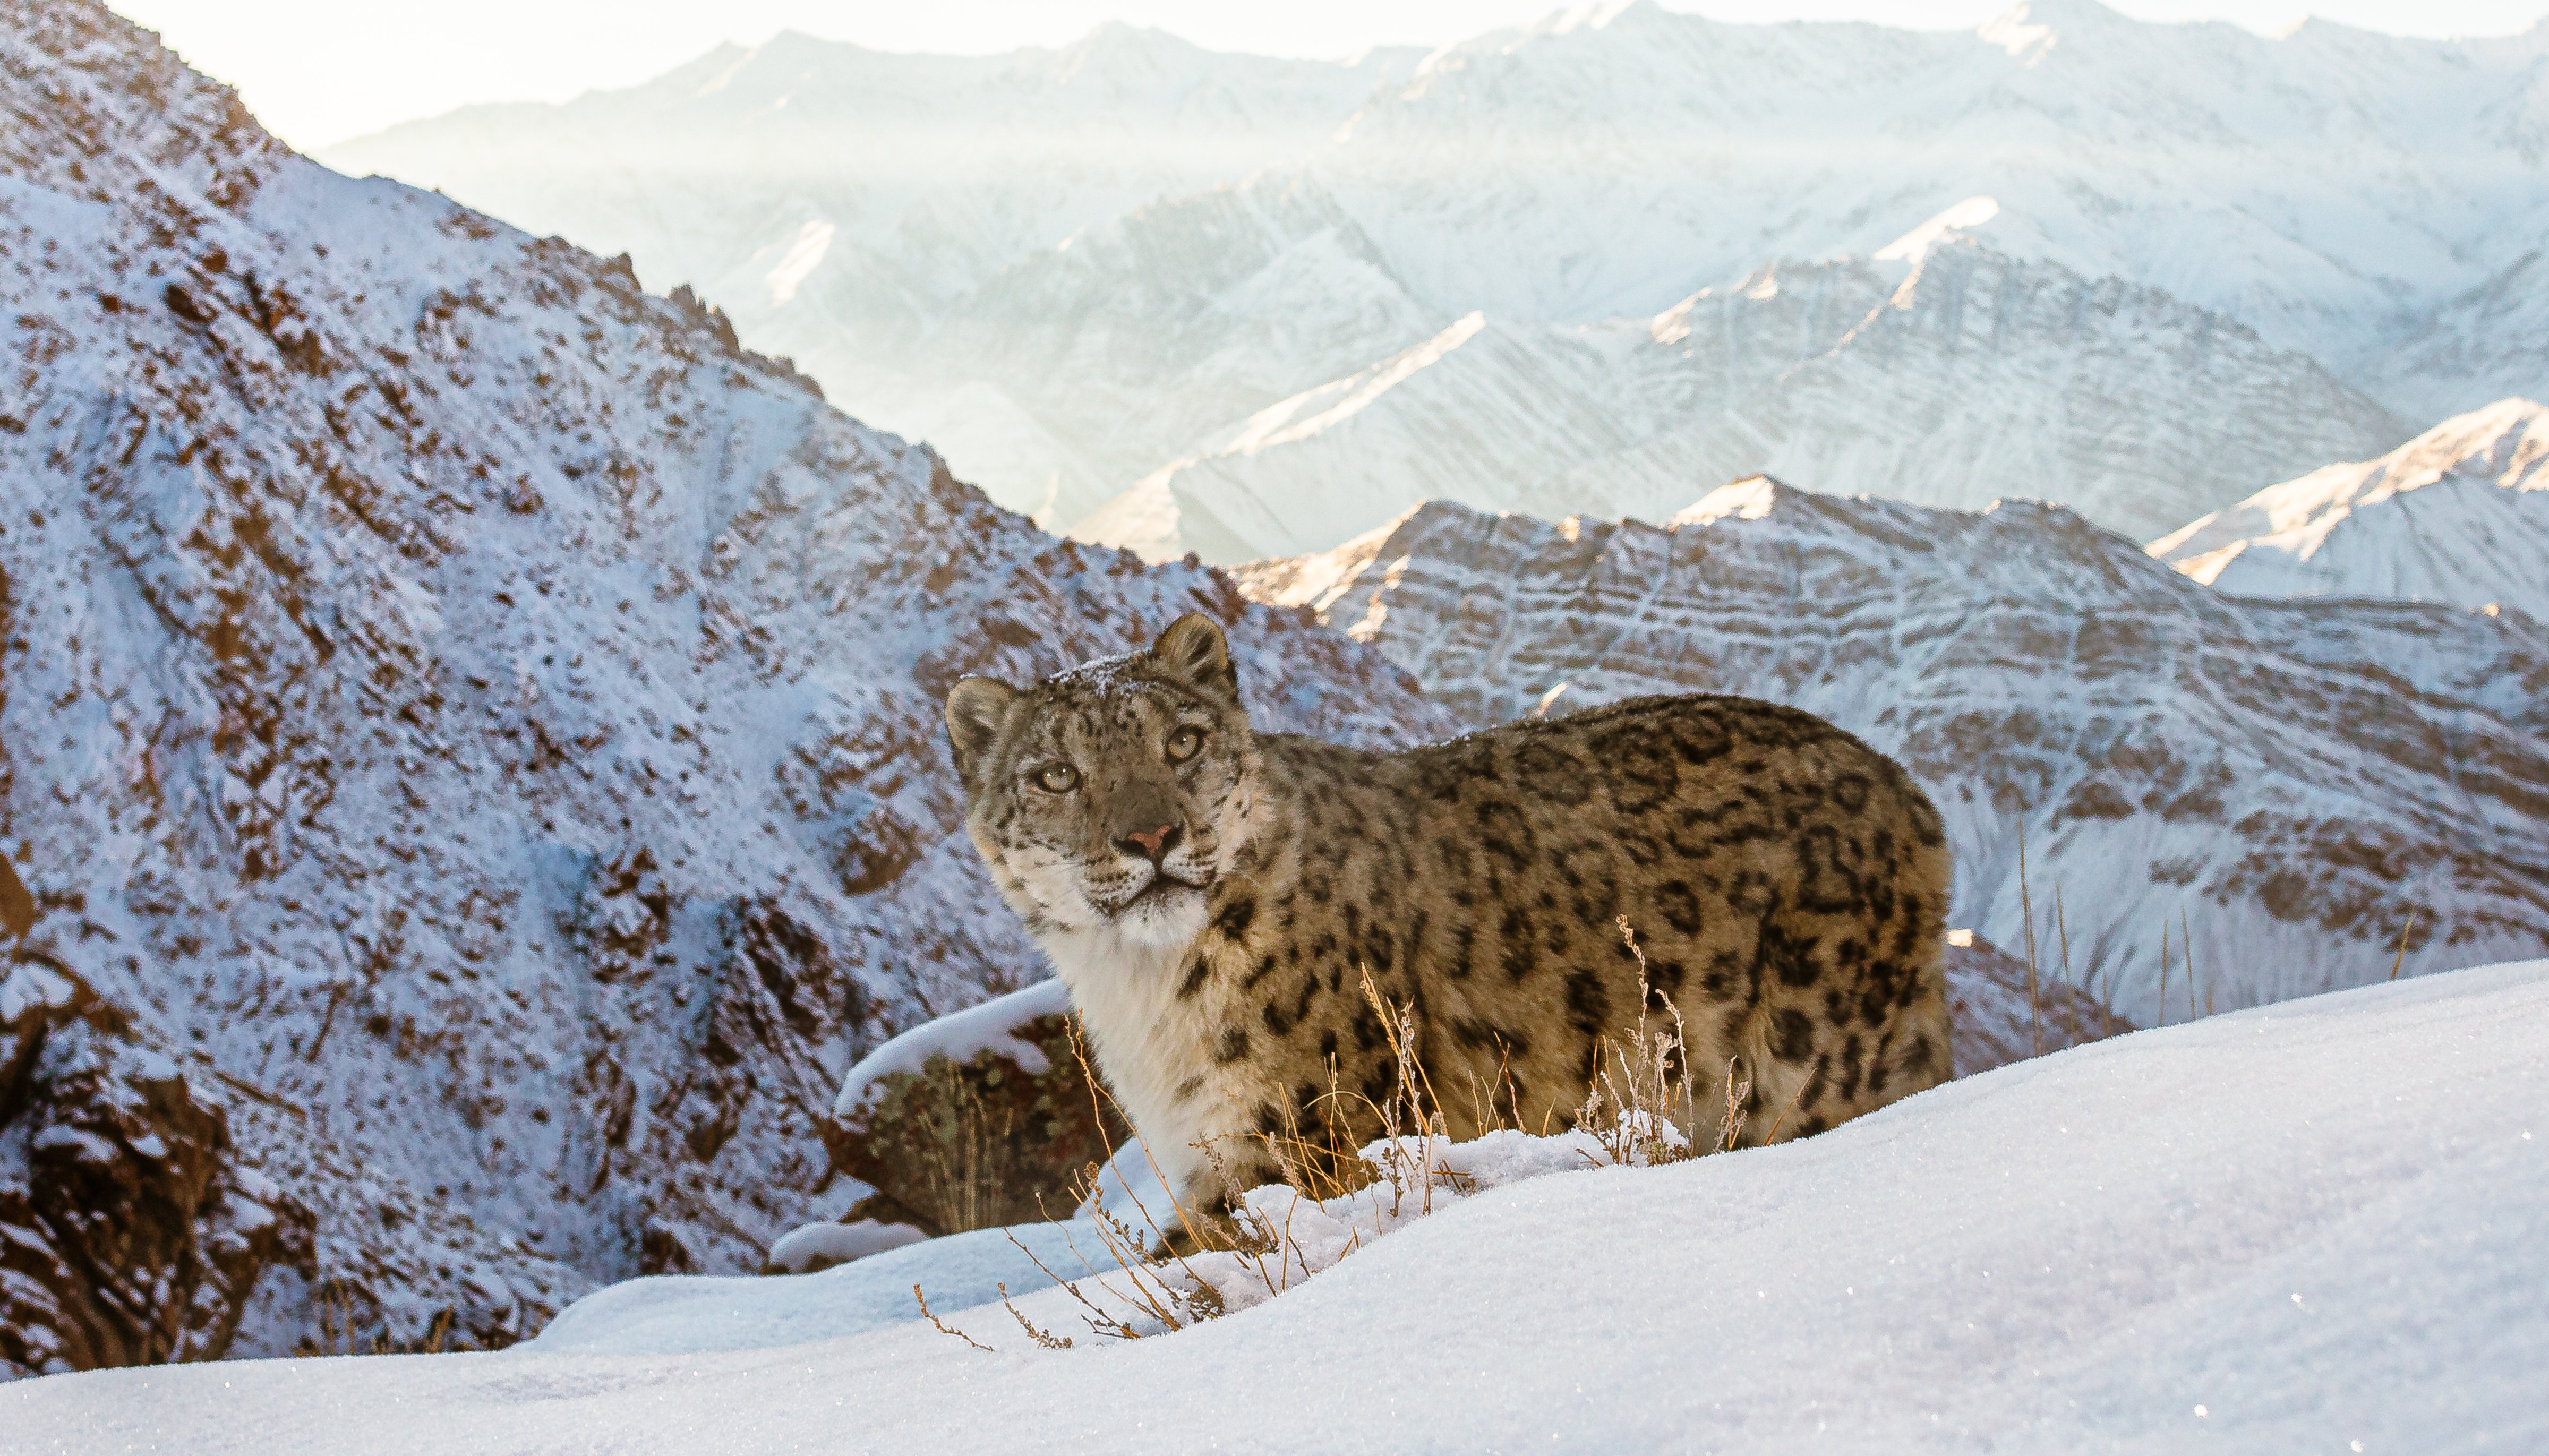 Read In Search of the Snow Leopard by WWF